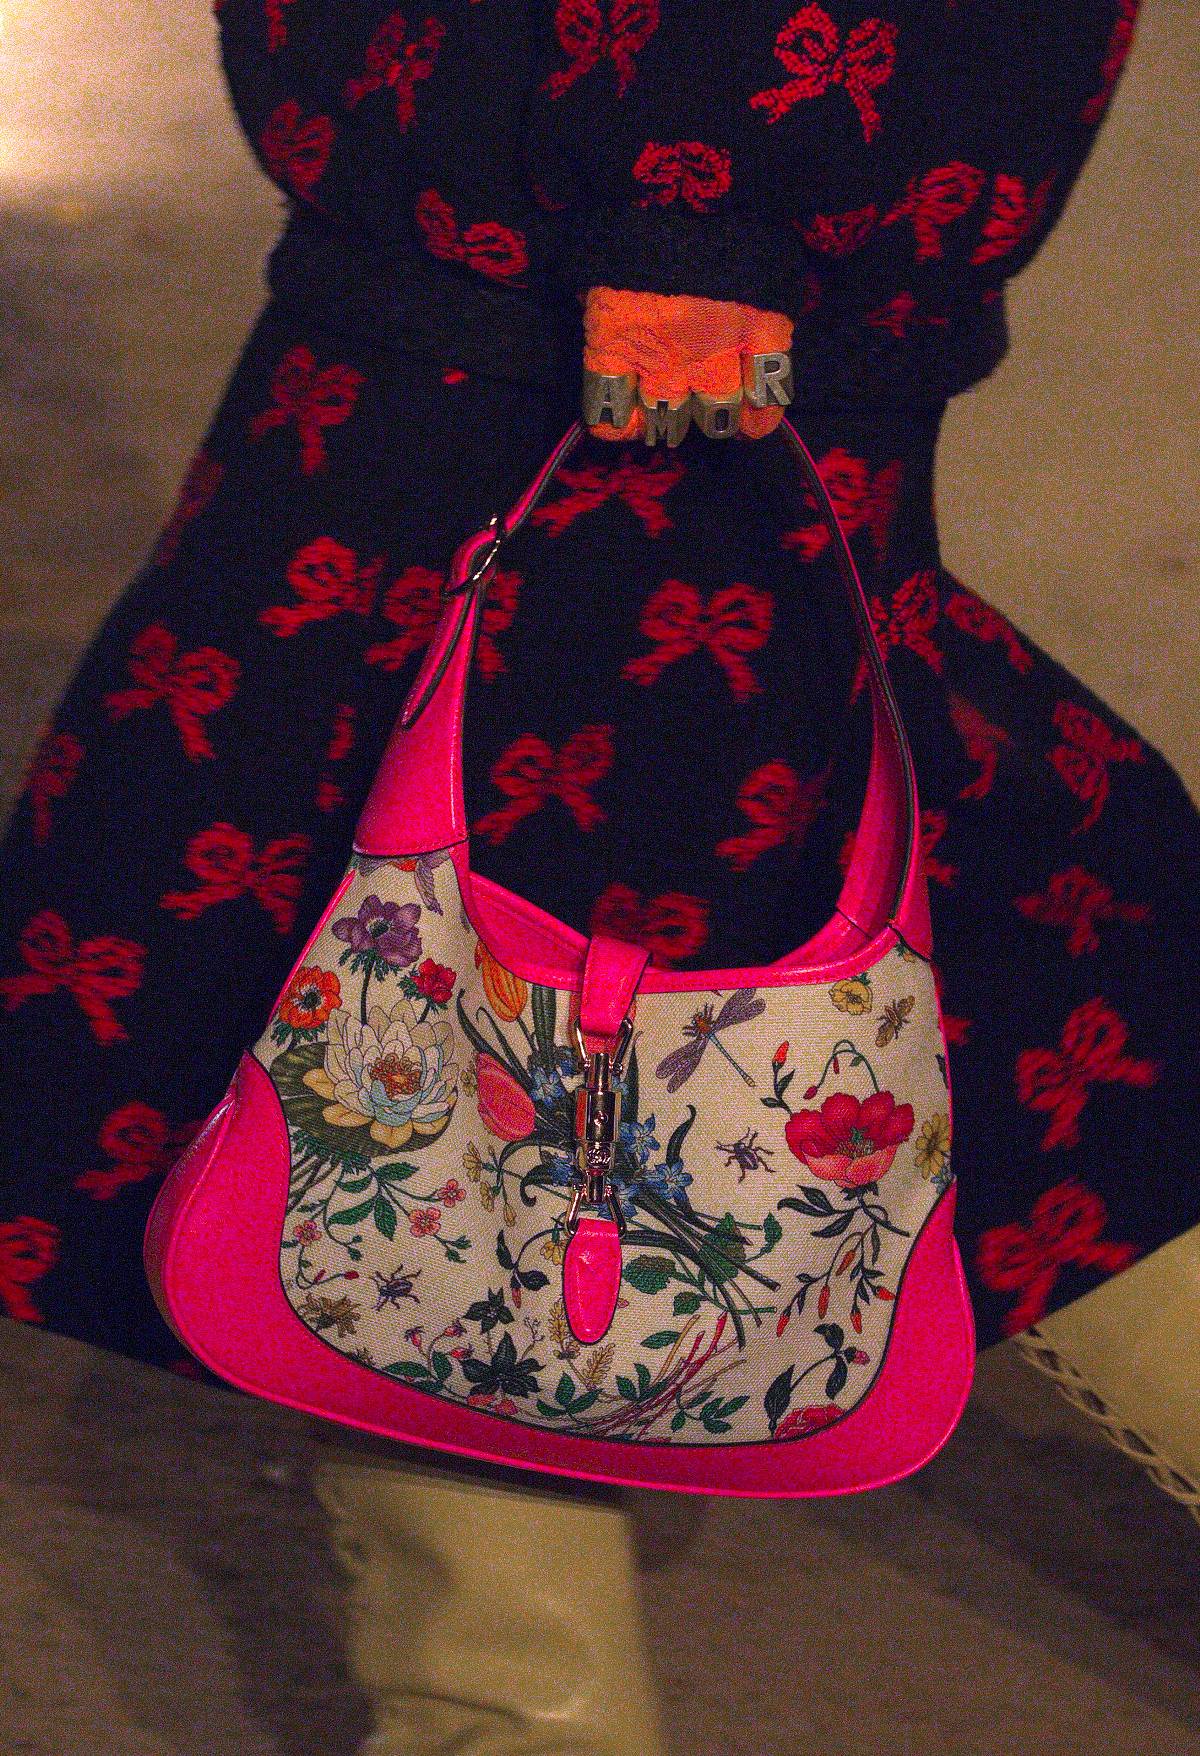 Gucci Pink Floral Hobo Bag - Cruise 2019